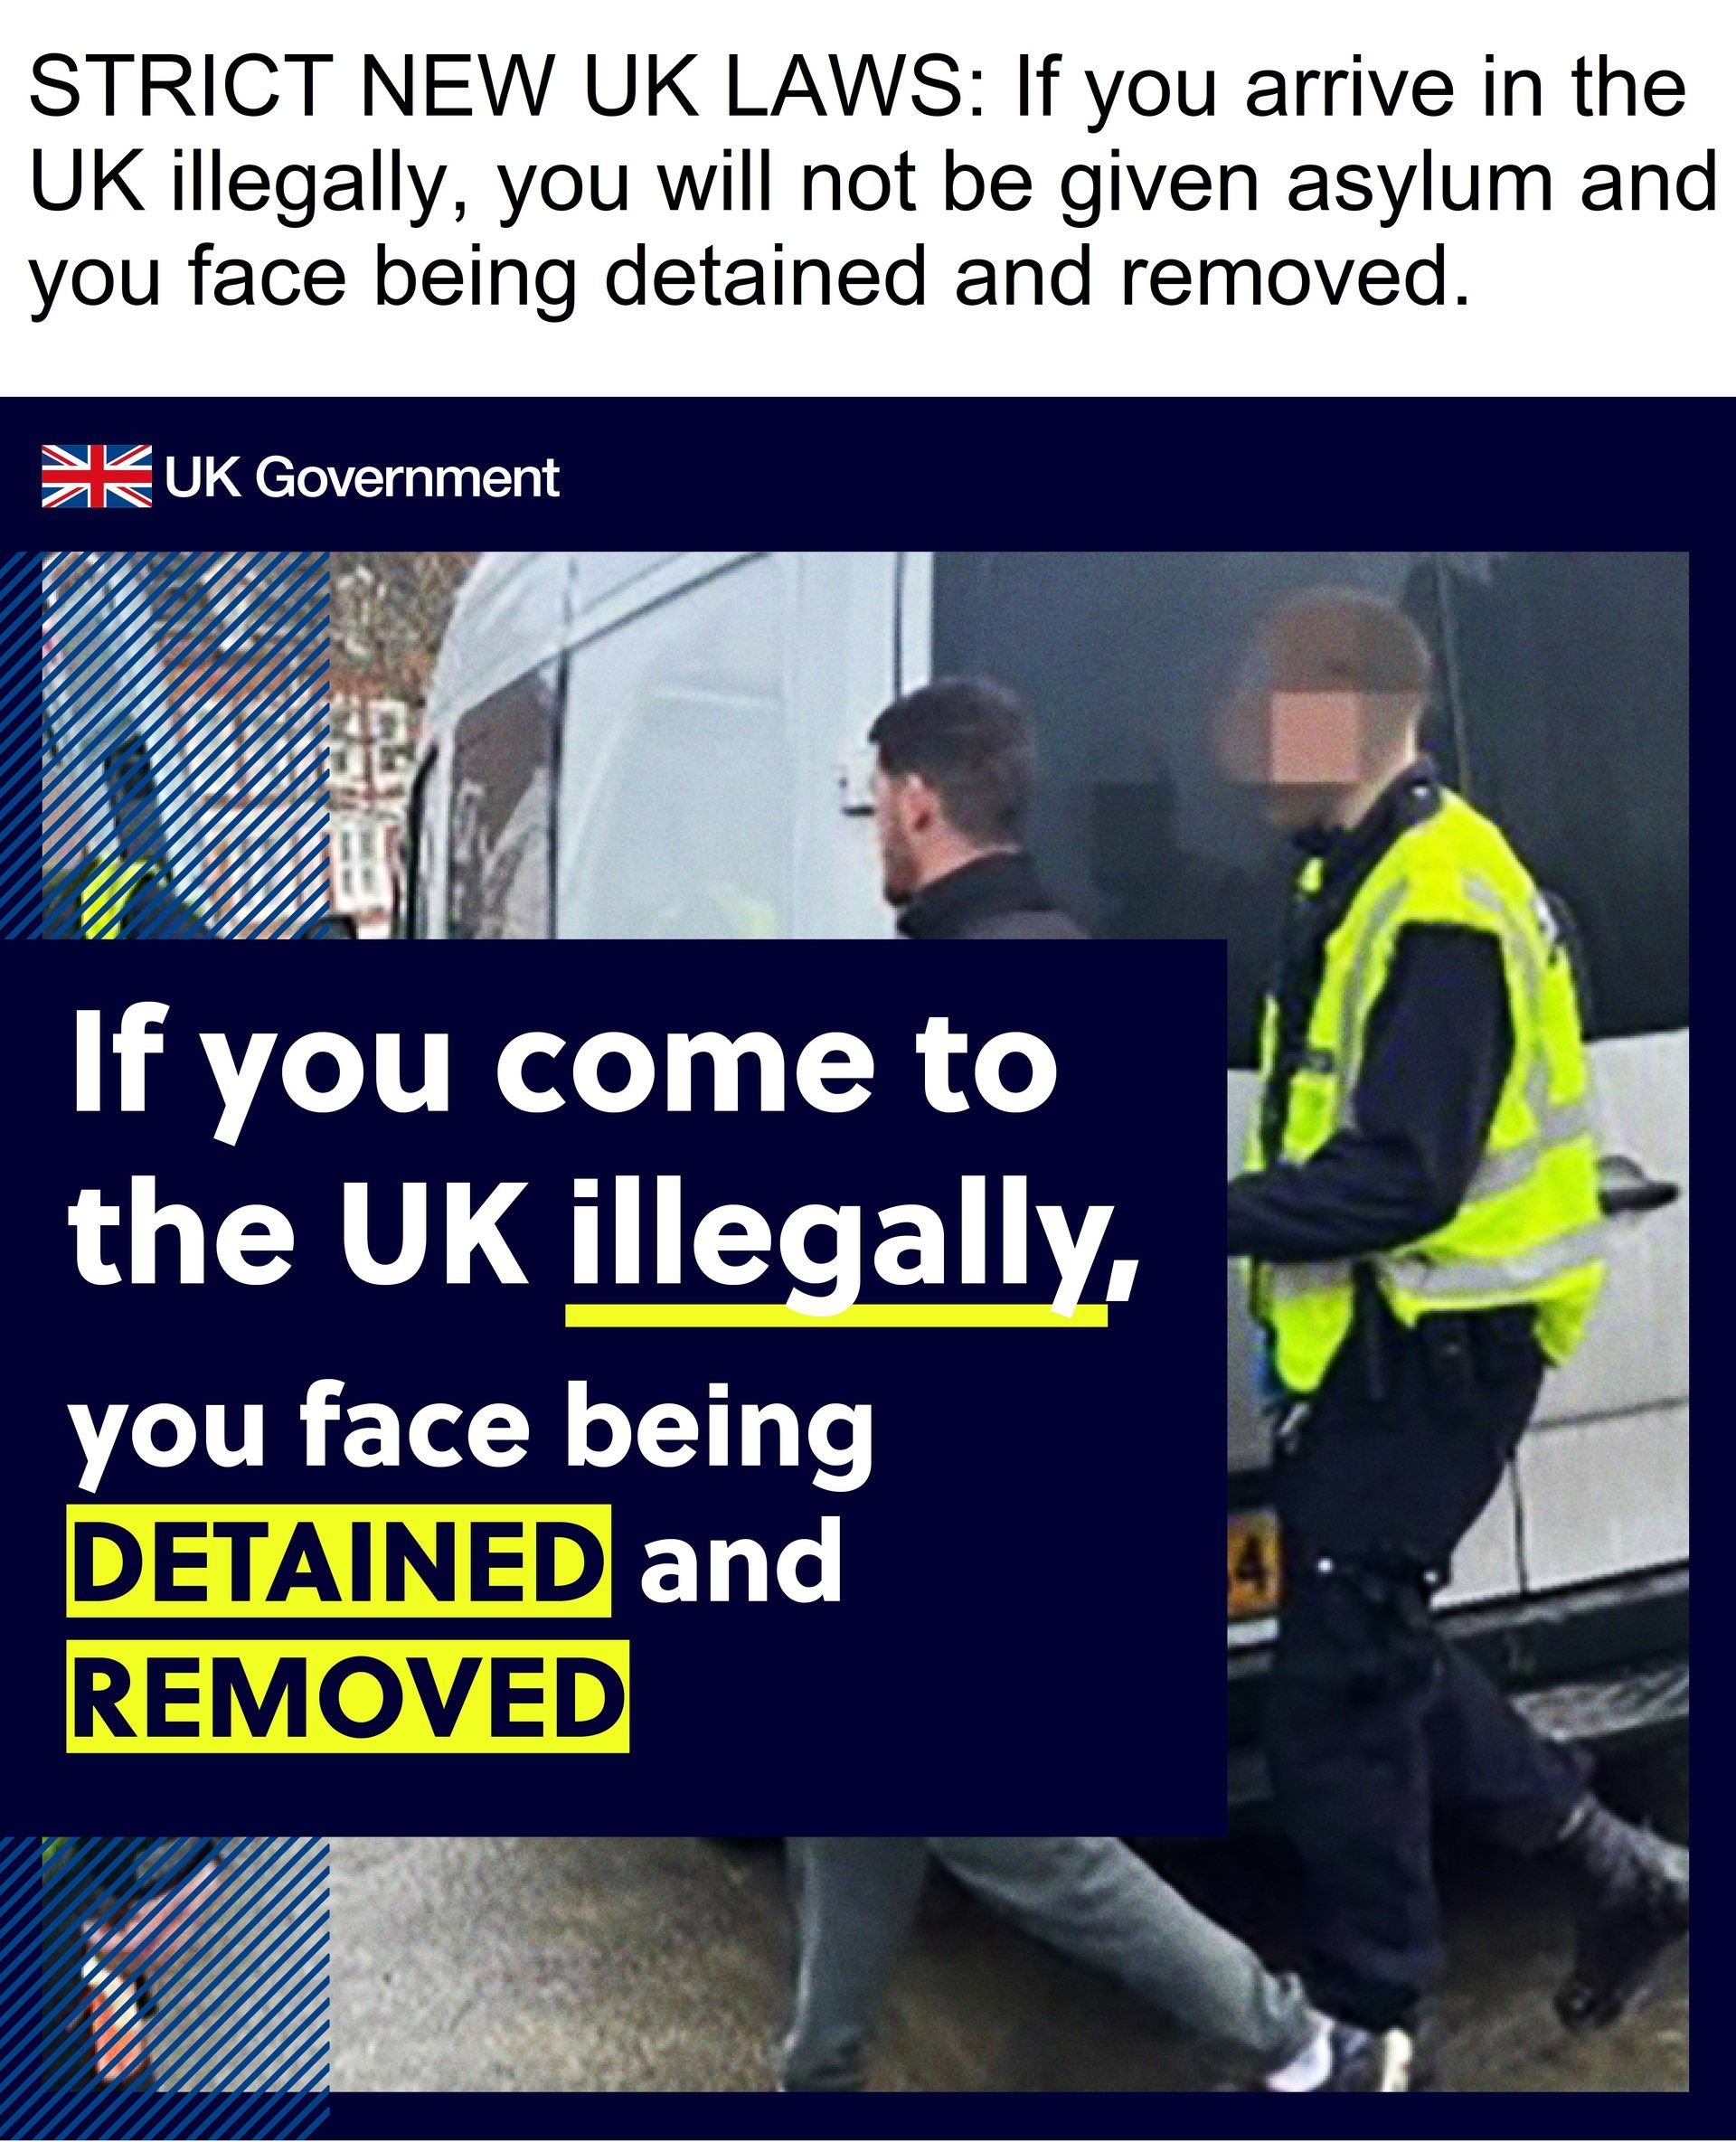 Advert targeting people considering entering the UK without permission. The Home Office will launch an ad campaign aimed at deterring Channel crossings with the message that people 